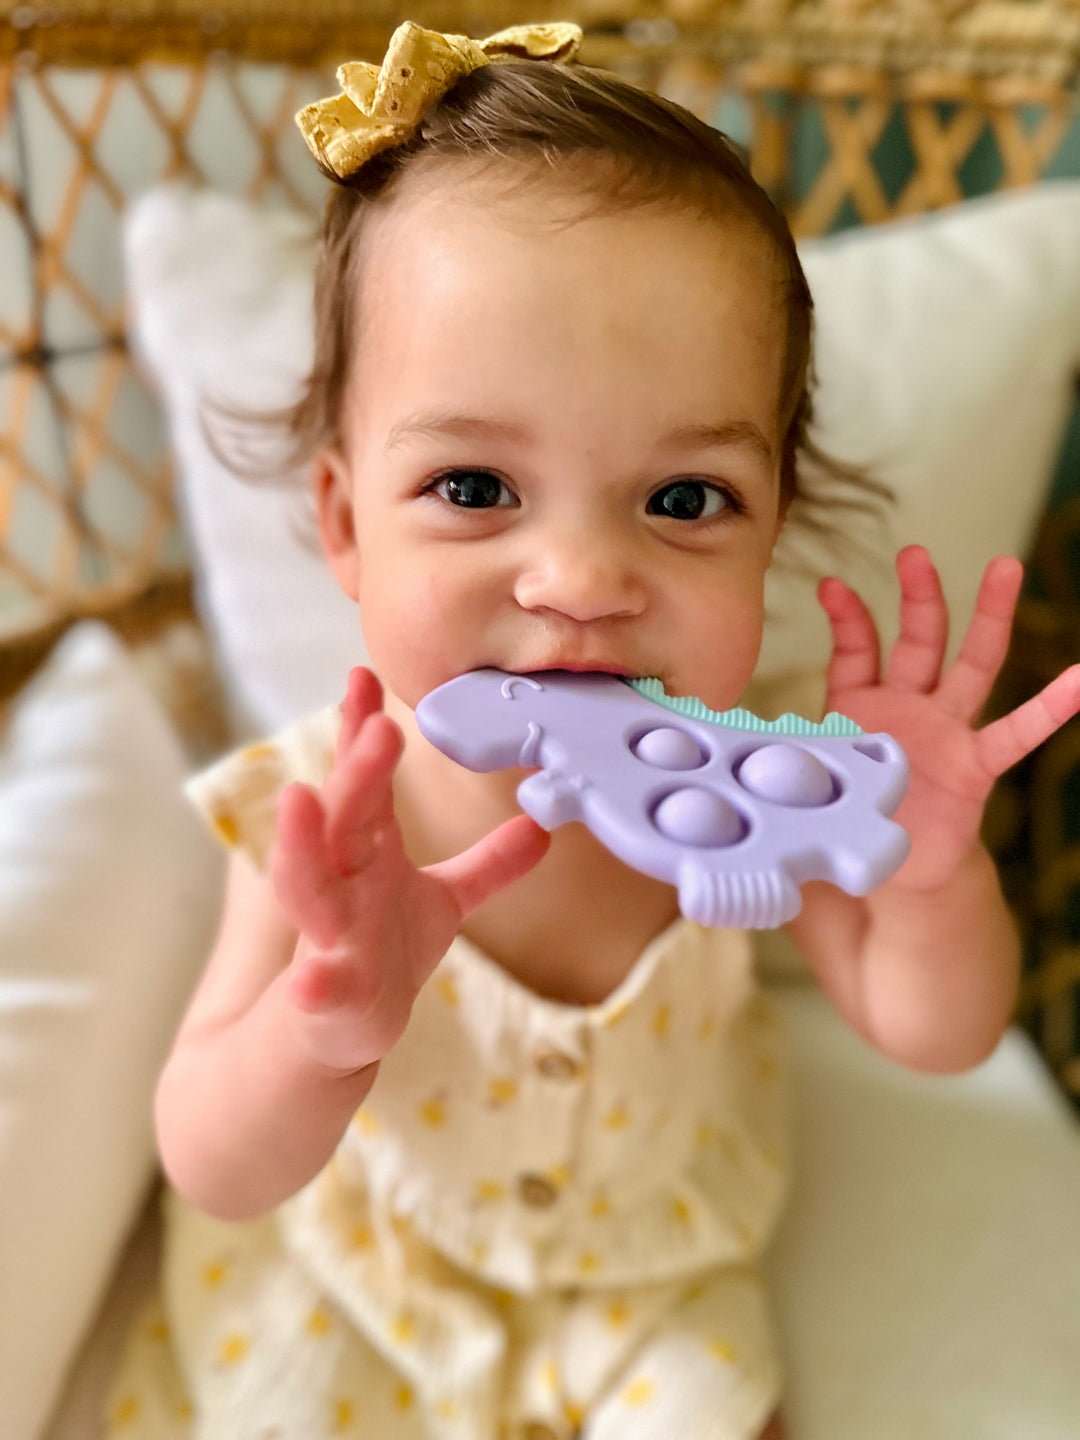 The Itzy Pop™ | Sensory Popper and Teething Toy